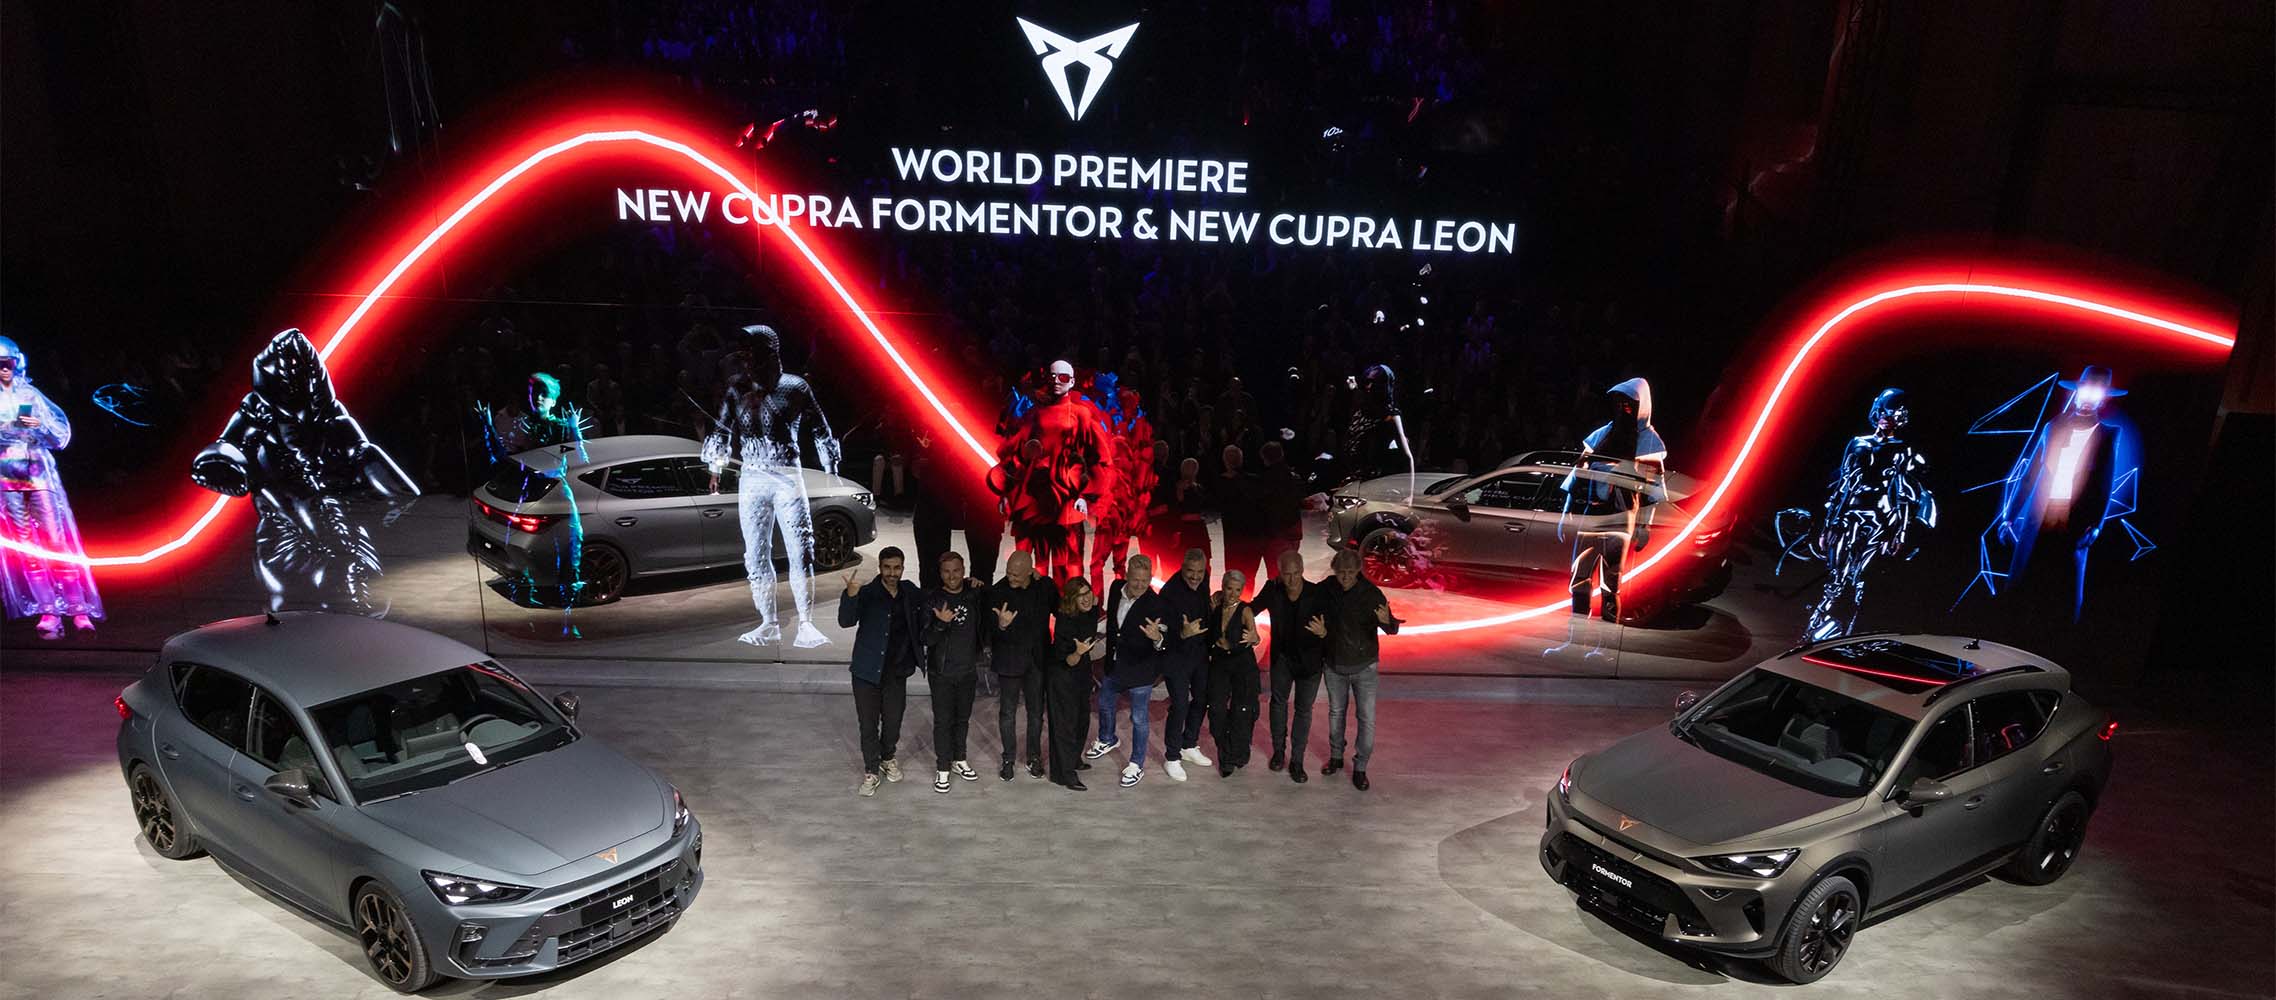 cupra team at the world premiere and debut of the new cupra formentor, leon and leon sportstourer